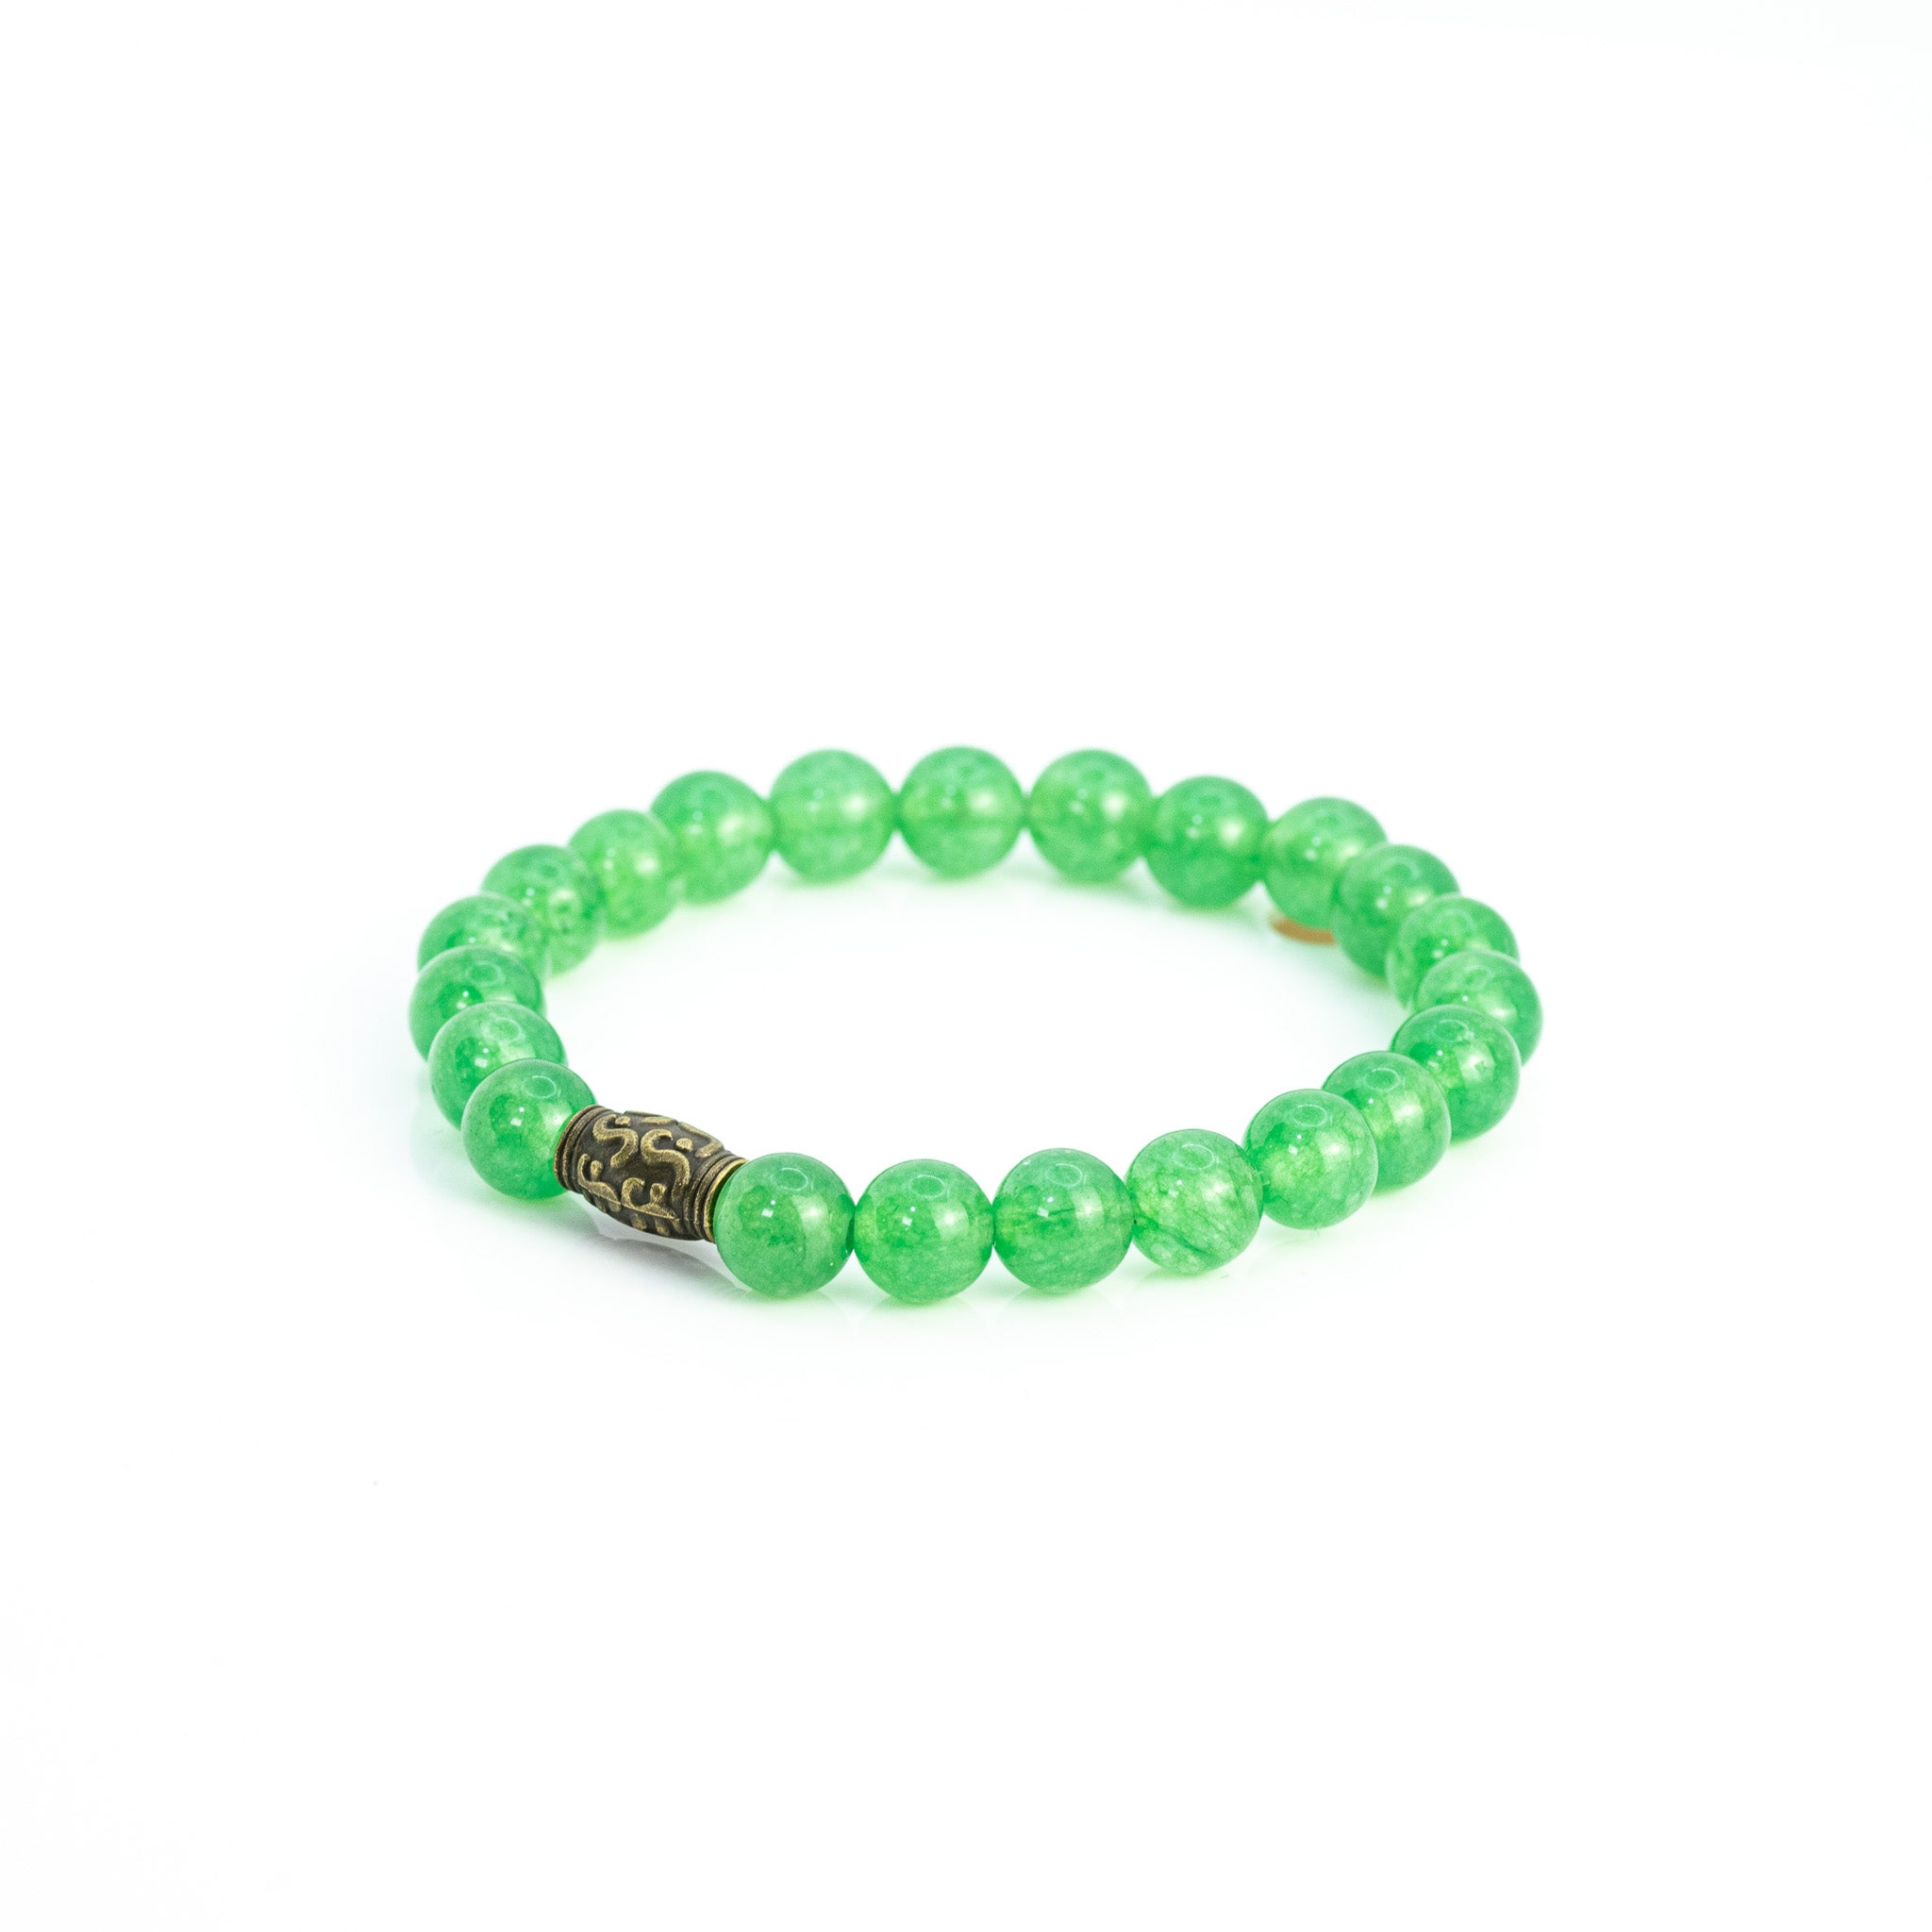 Green Aventurine for happiness, luck, optimism and prosperity